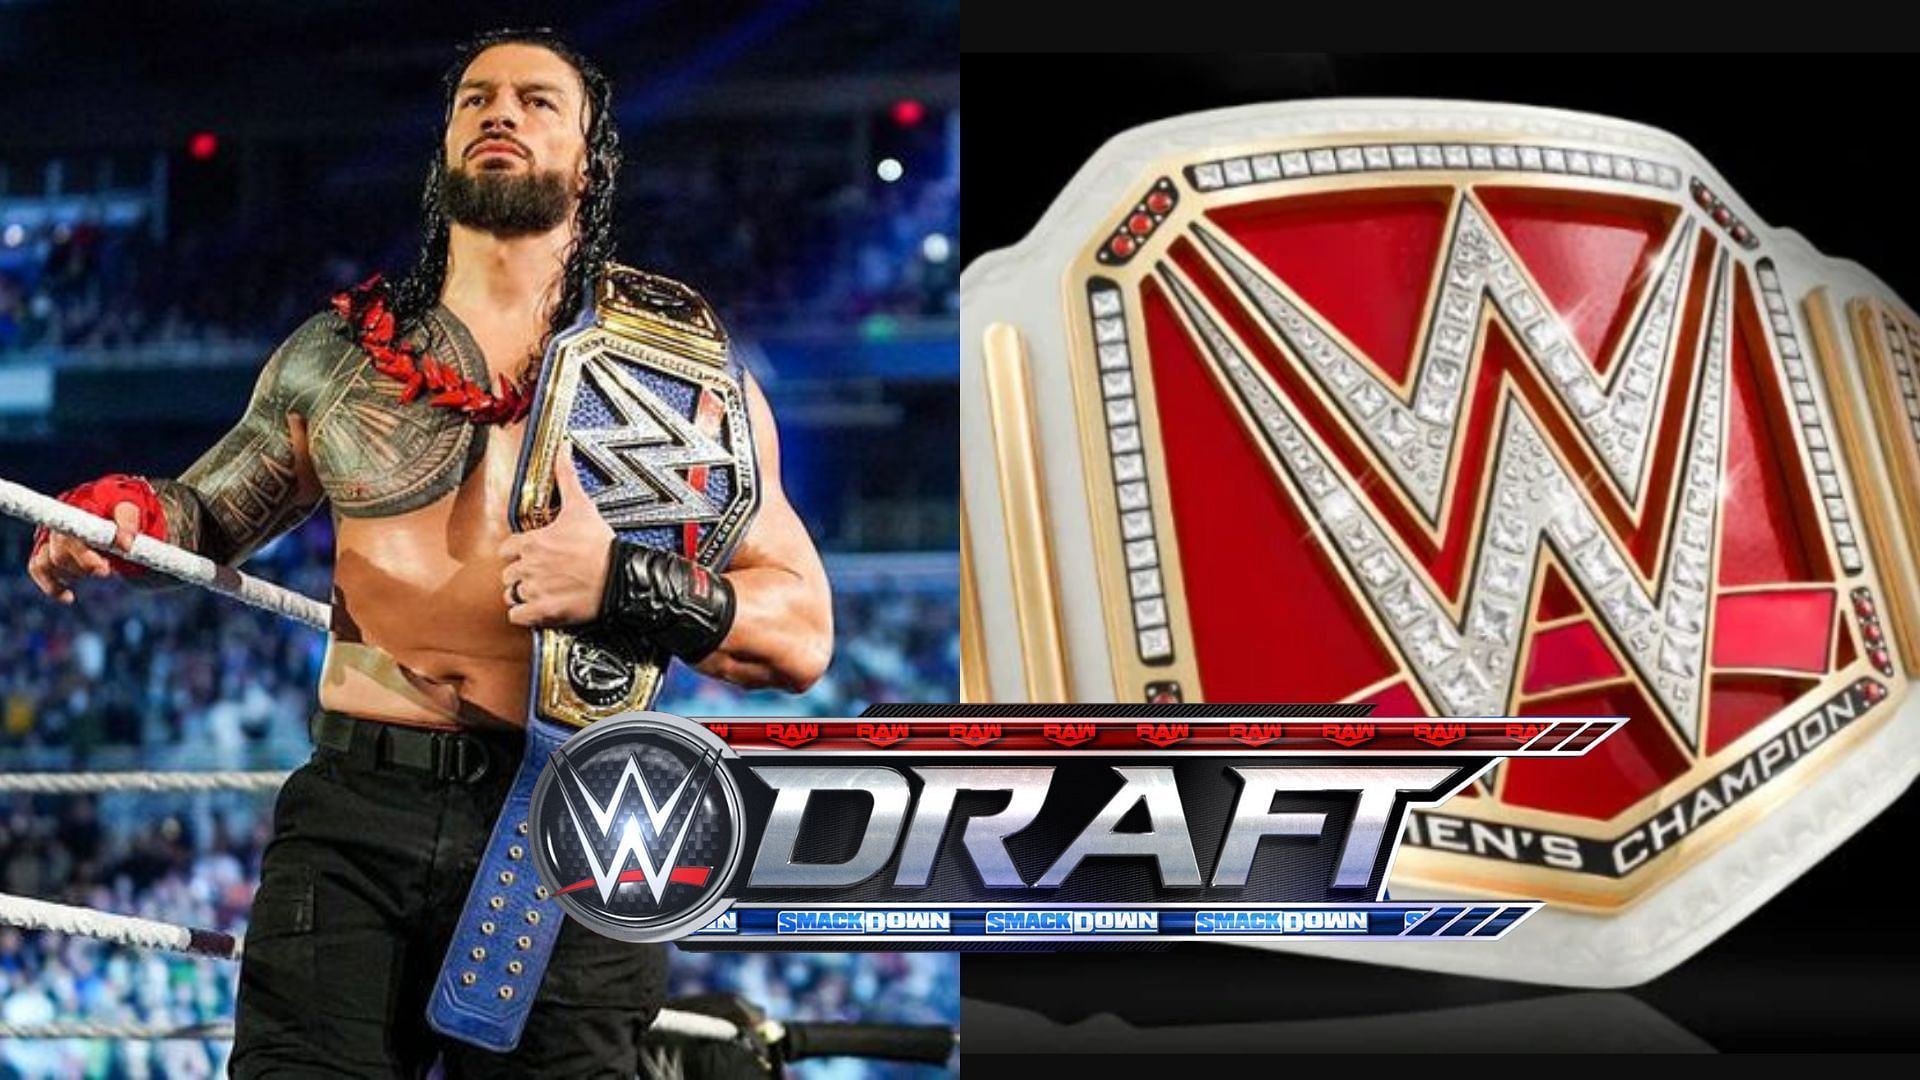 WWE Draft 2023 has increased the chances for some high-profile feuds